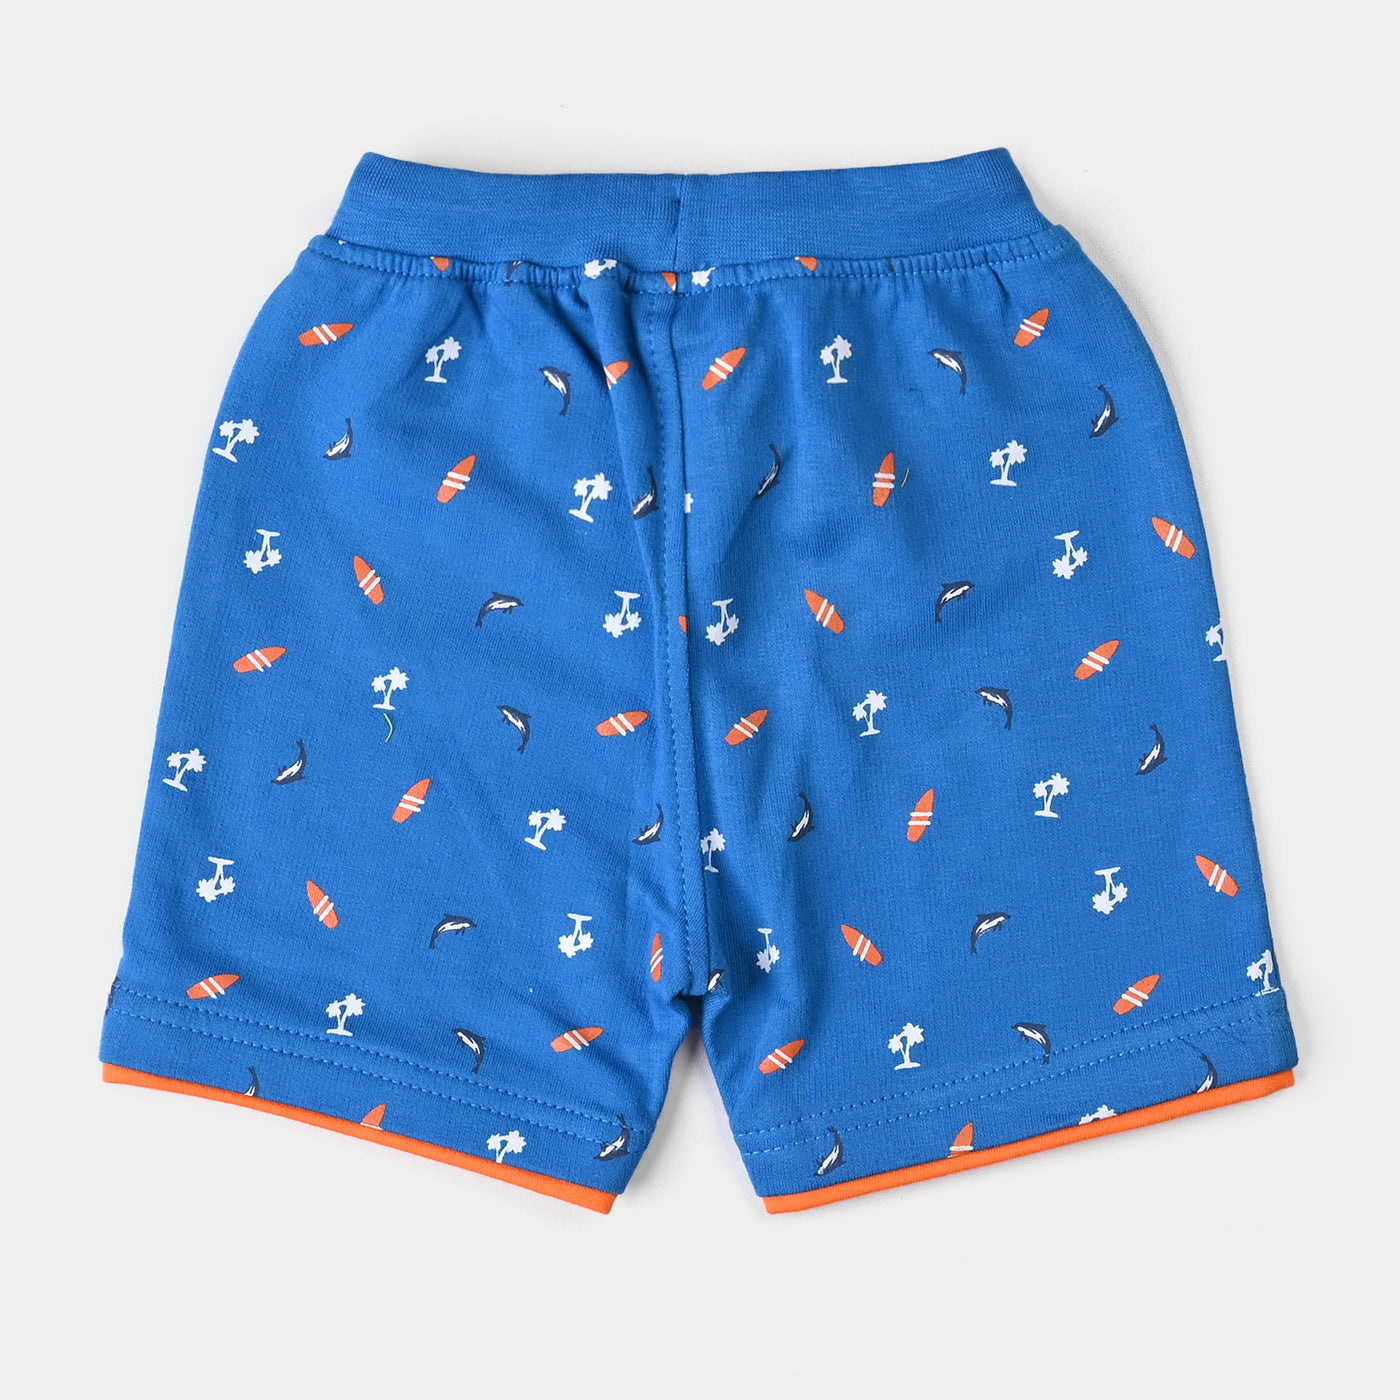 Infant Boys Cotton Terry Knitted Short Beach-Brill.Blue